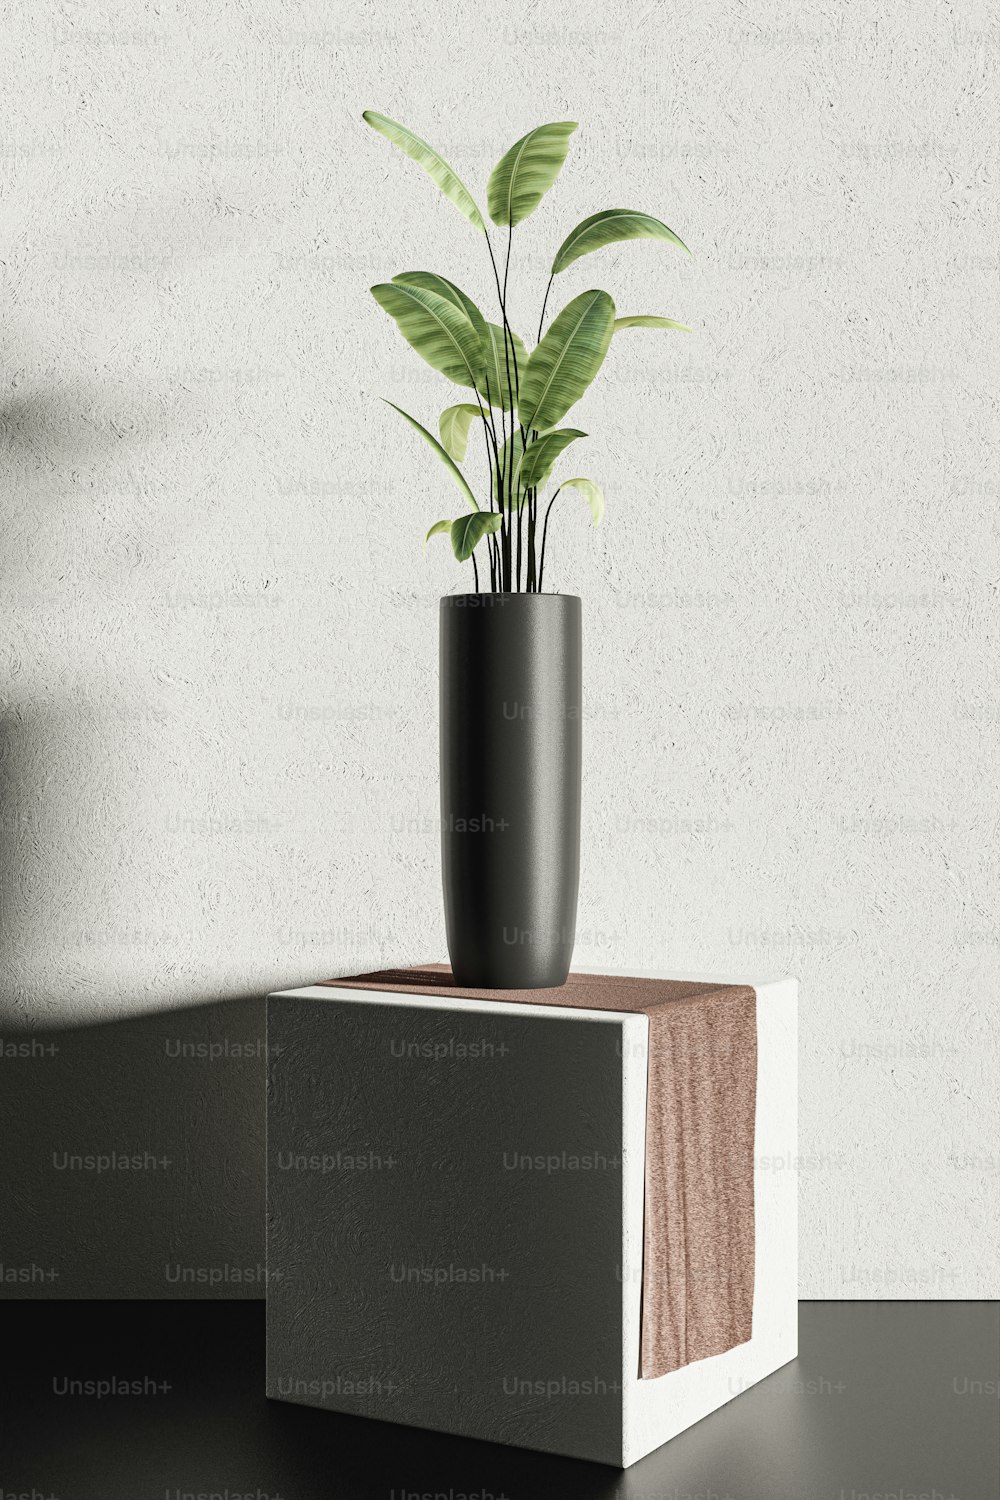 a potted plant sitting on top of a wooden block